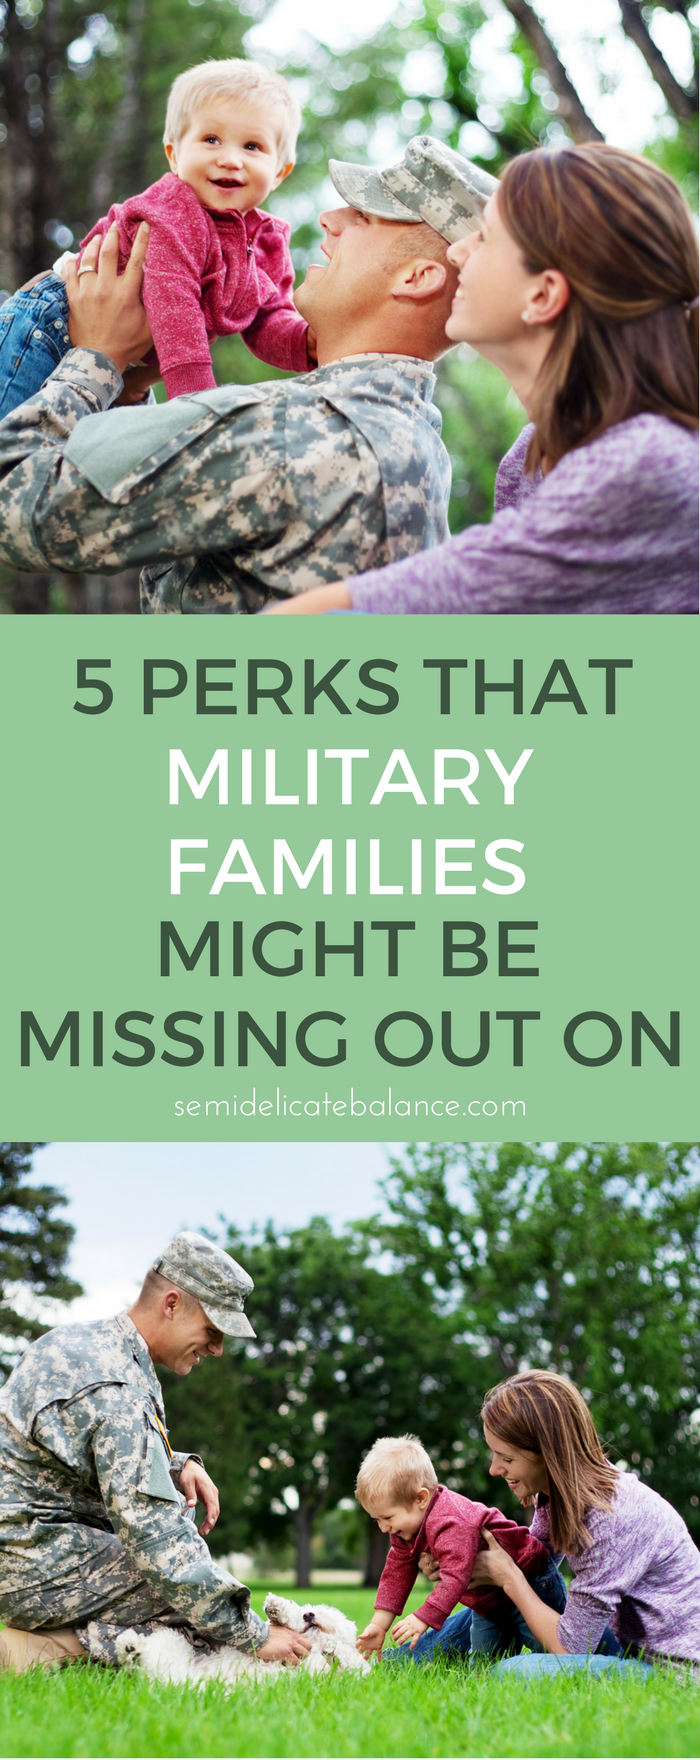 5 Military Perks THAT MILITARY FAMILIES Might Be Missing Out On